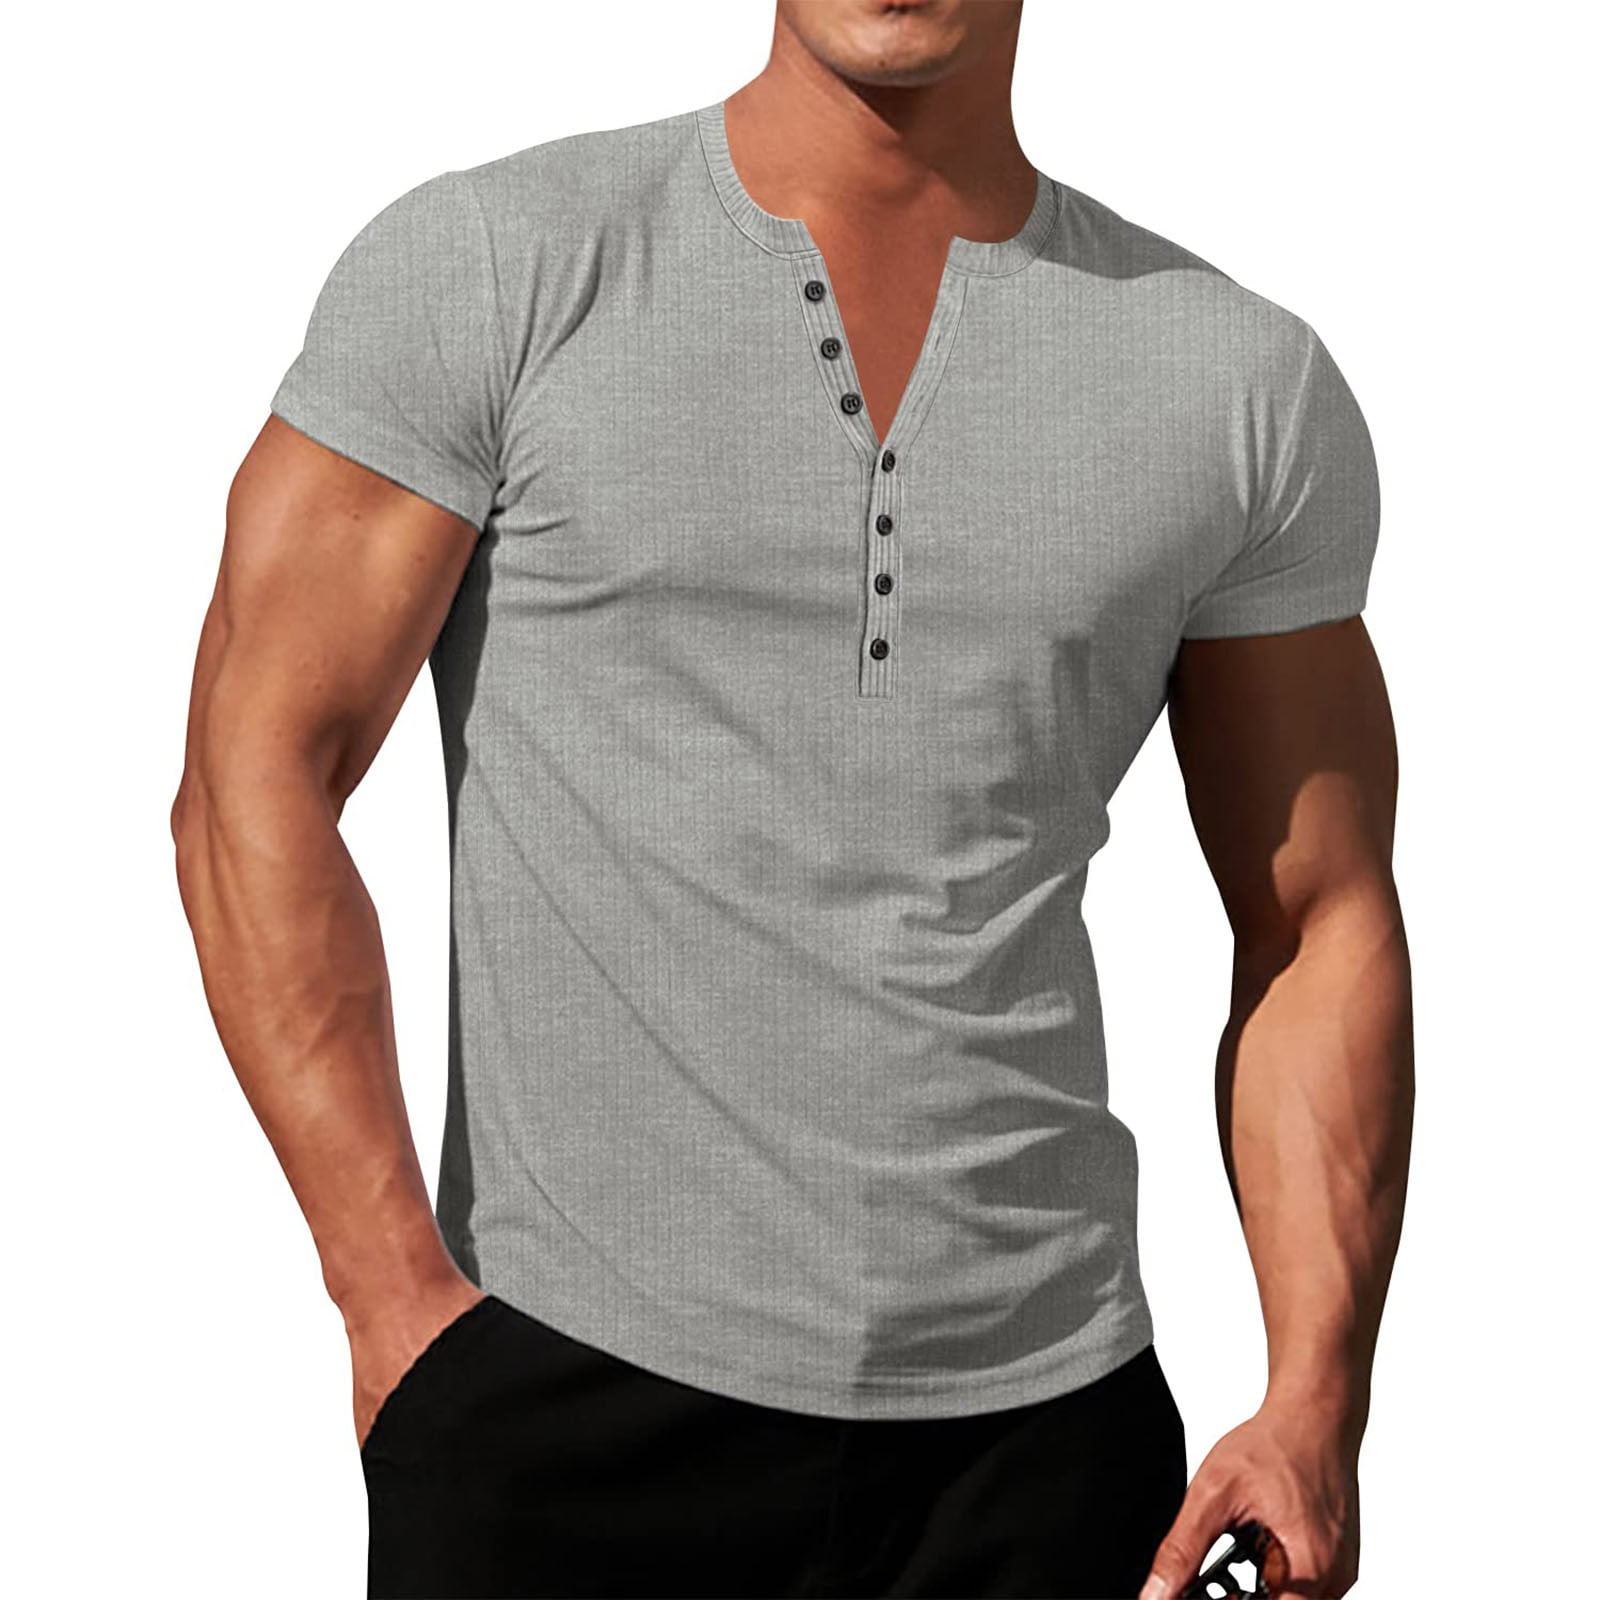 What is a henley shirt?